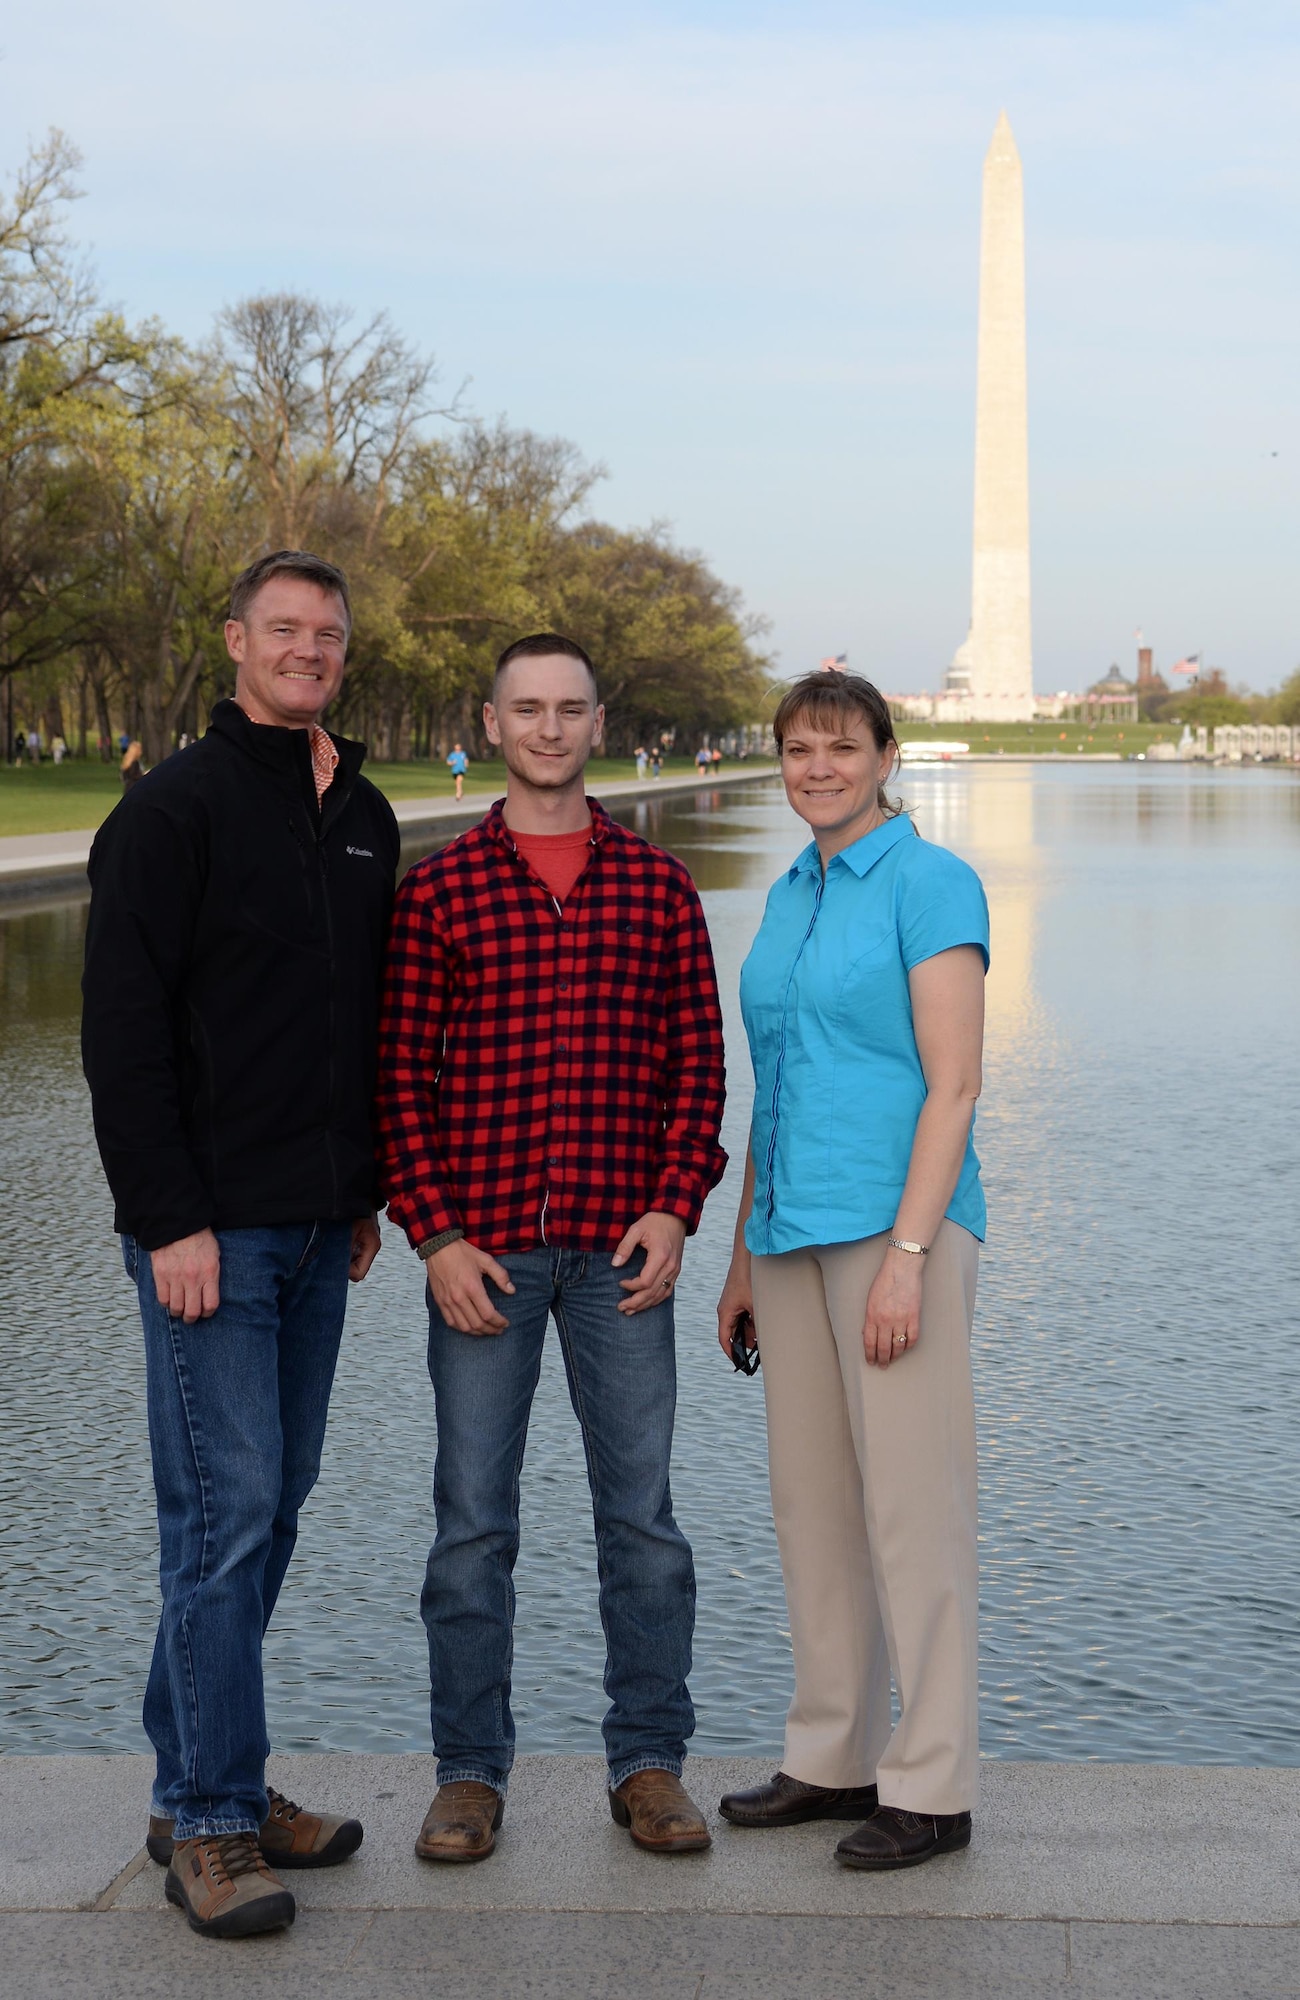 Staff Sgt. Cody Sparks, center, Air Education and Training Command Airman of the Year, poses with Col. Thomas Shank, left, 47th Flying Training Wing commander, and Chief Master Sgt. Teresa Clapper, right, 47th FTW command chief, in front of the Washington Monument April 11, 2016. The trio visited Capitol Hill to inform congressional leadership about Laughlin Air Force Base.